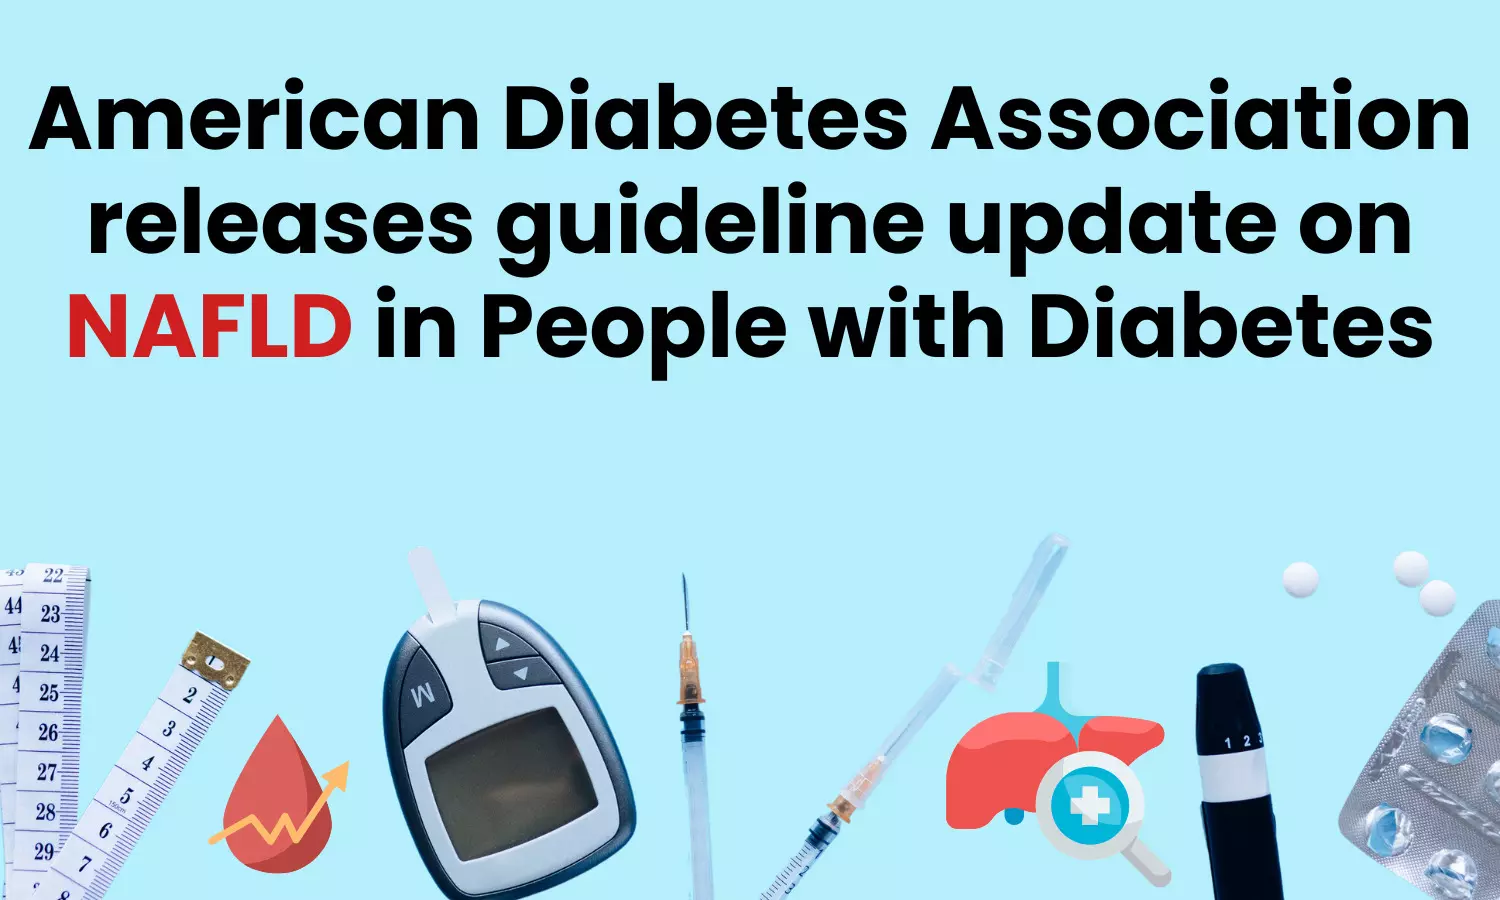 American Diabetes Association releases guideline update on NAFLD in People with diabetes